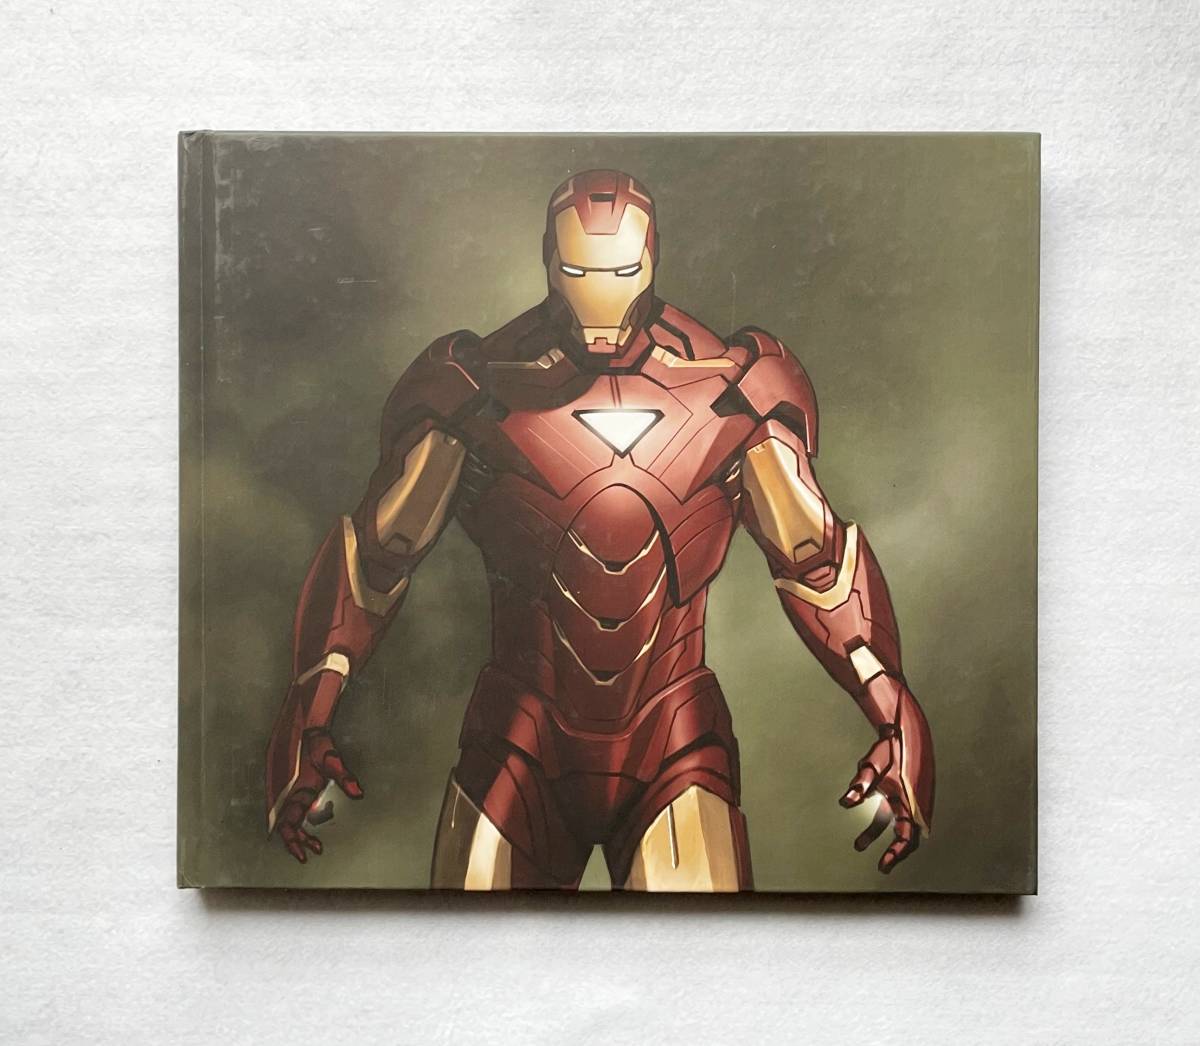  foreign book THE ART OF IRON MAN 2ma-be lure toob Ironman 2 used book